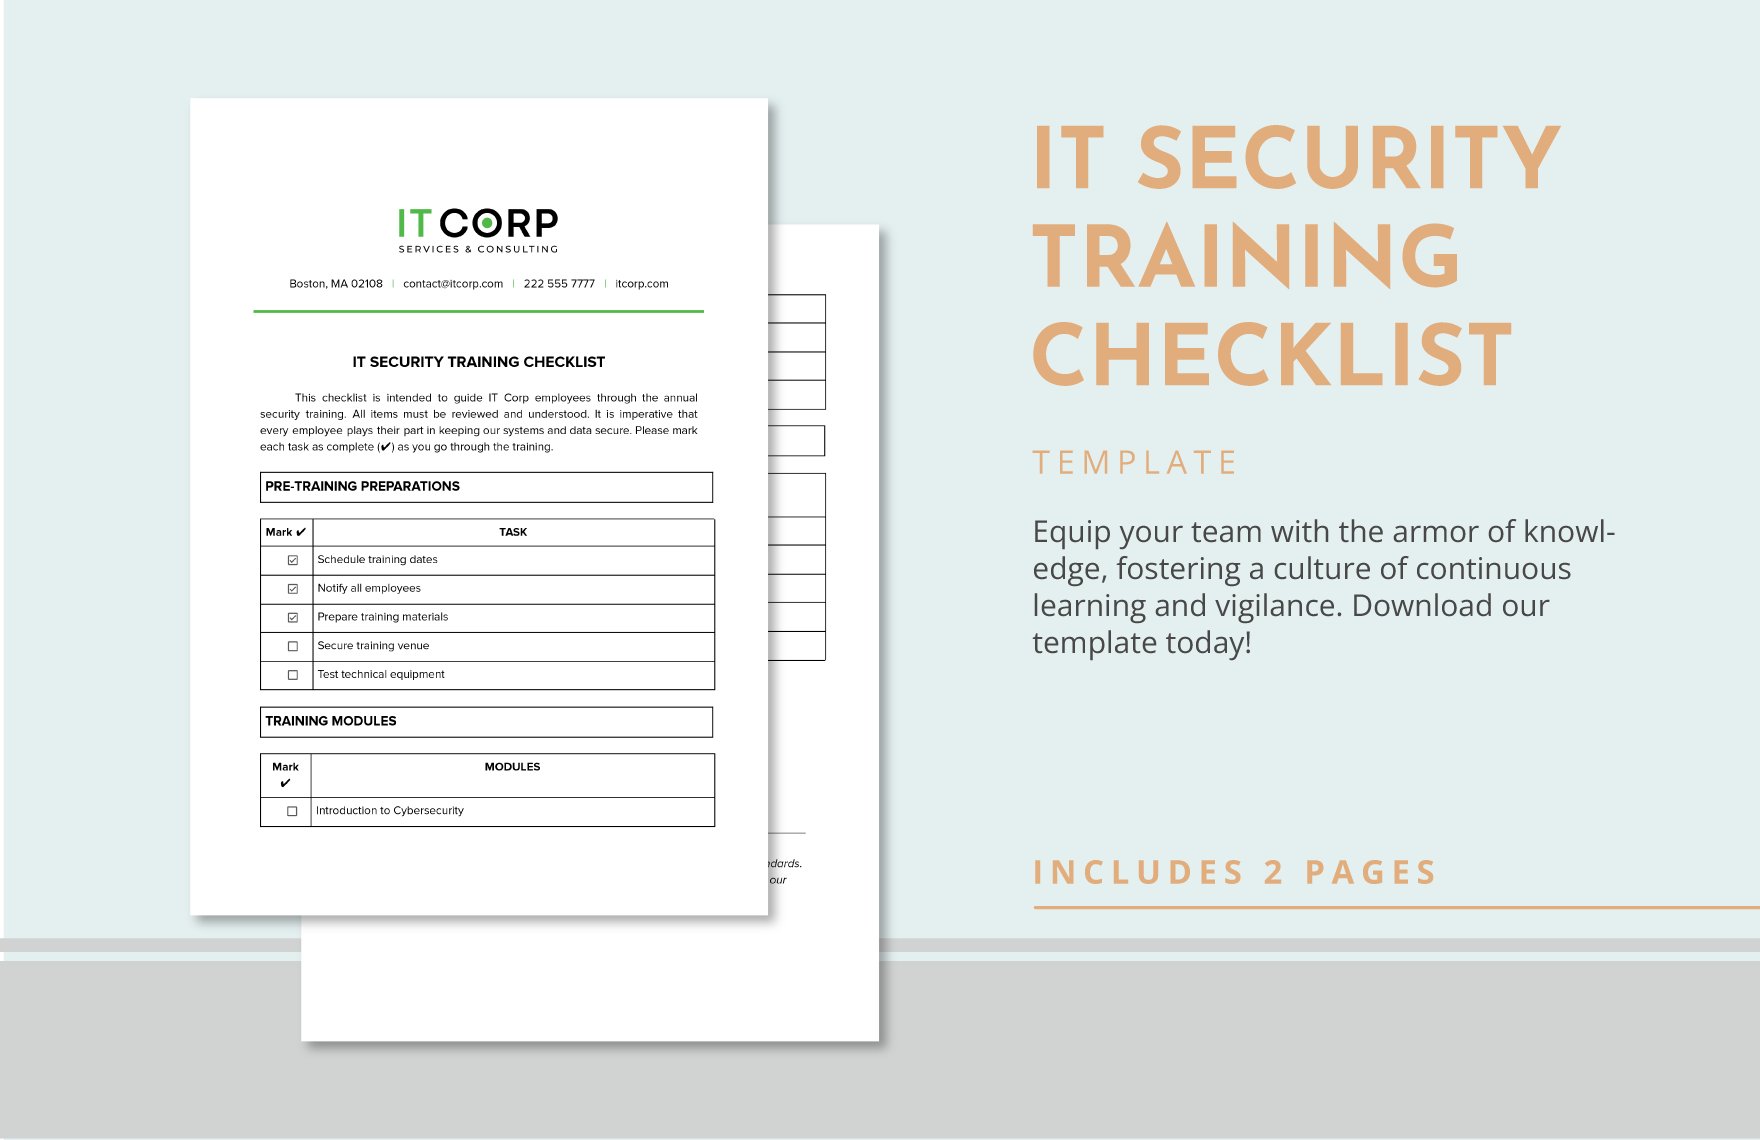 IT Security Training Checklist Template